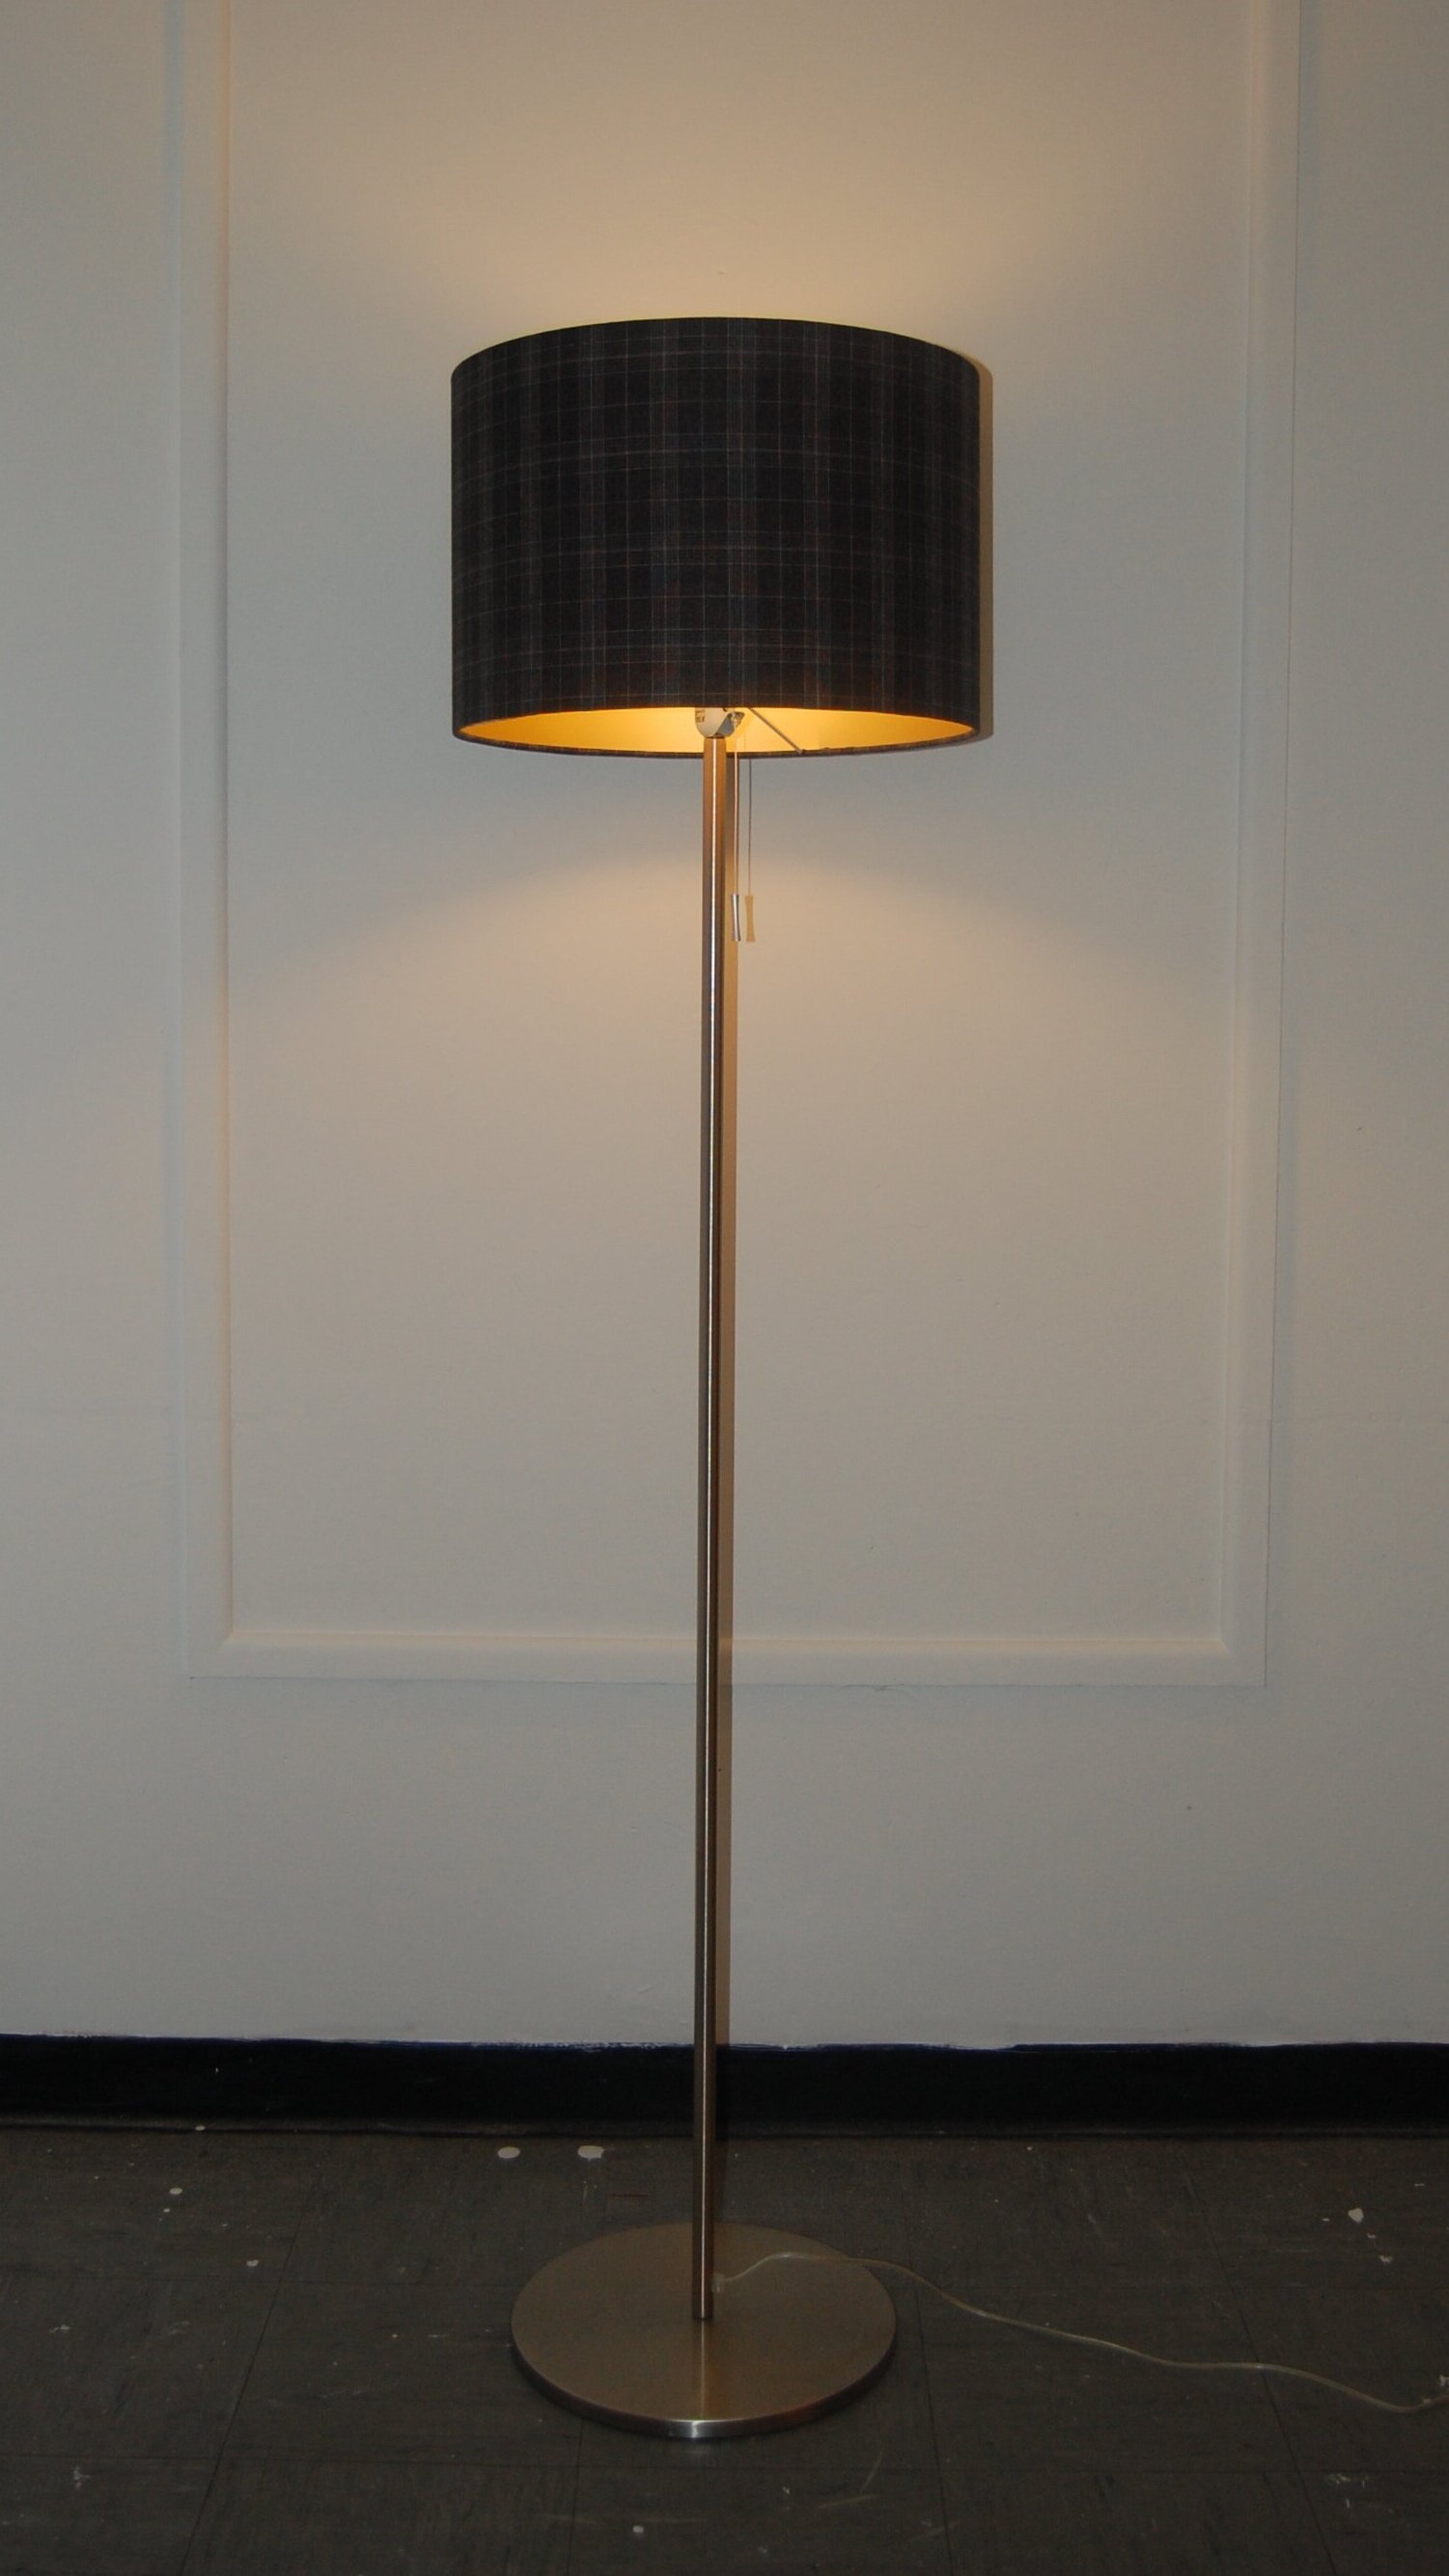 Bespoke Floor Lamp Shades And Standard, Cylinder Lamp Shades For Floor Lamps